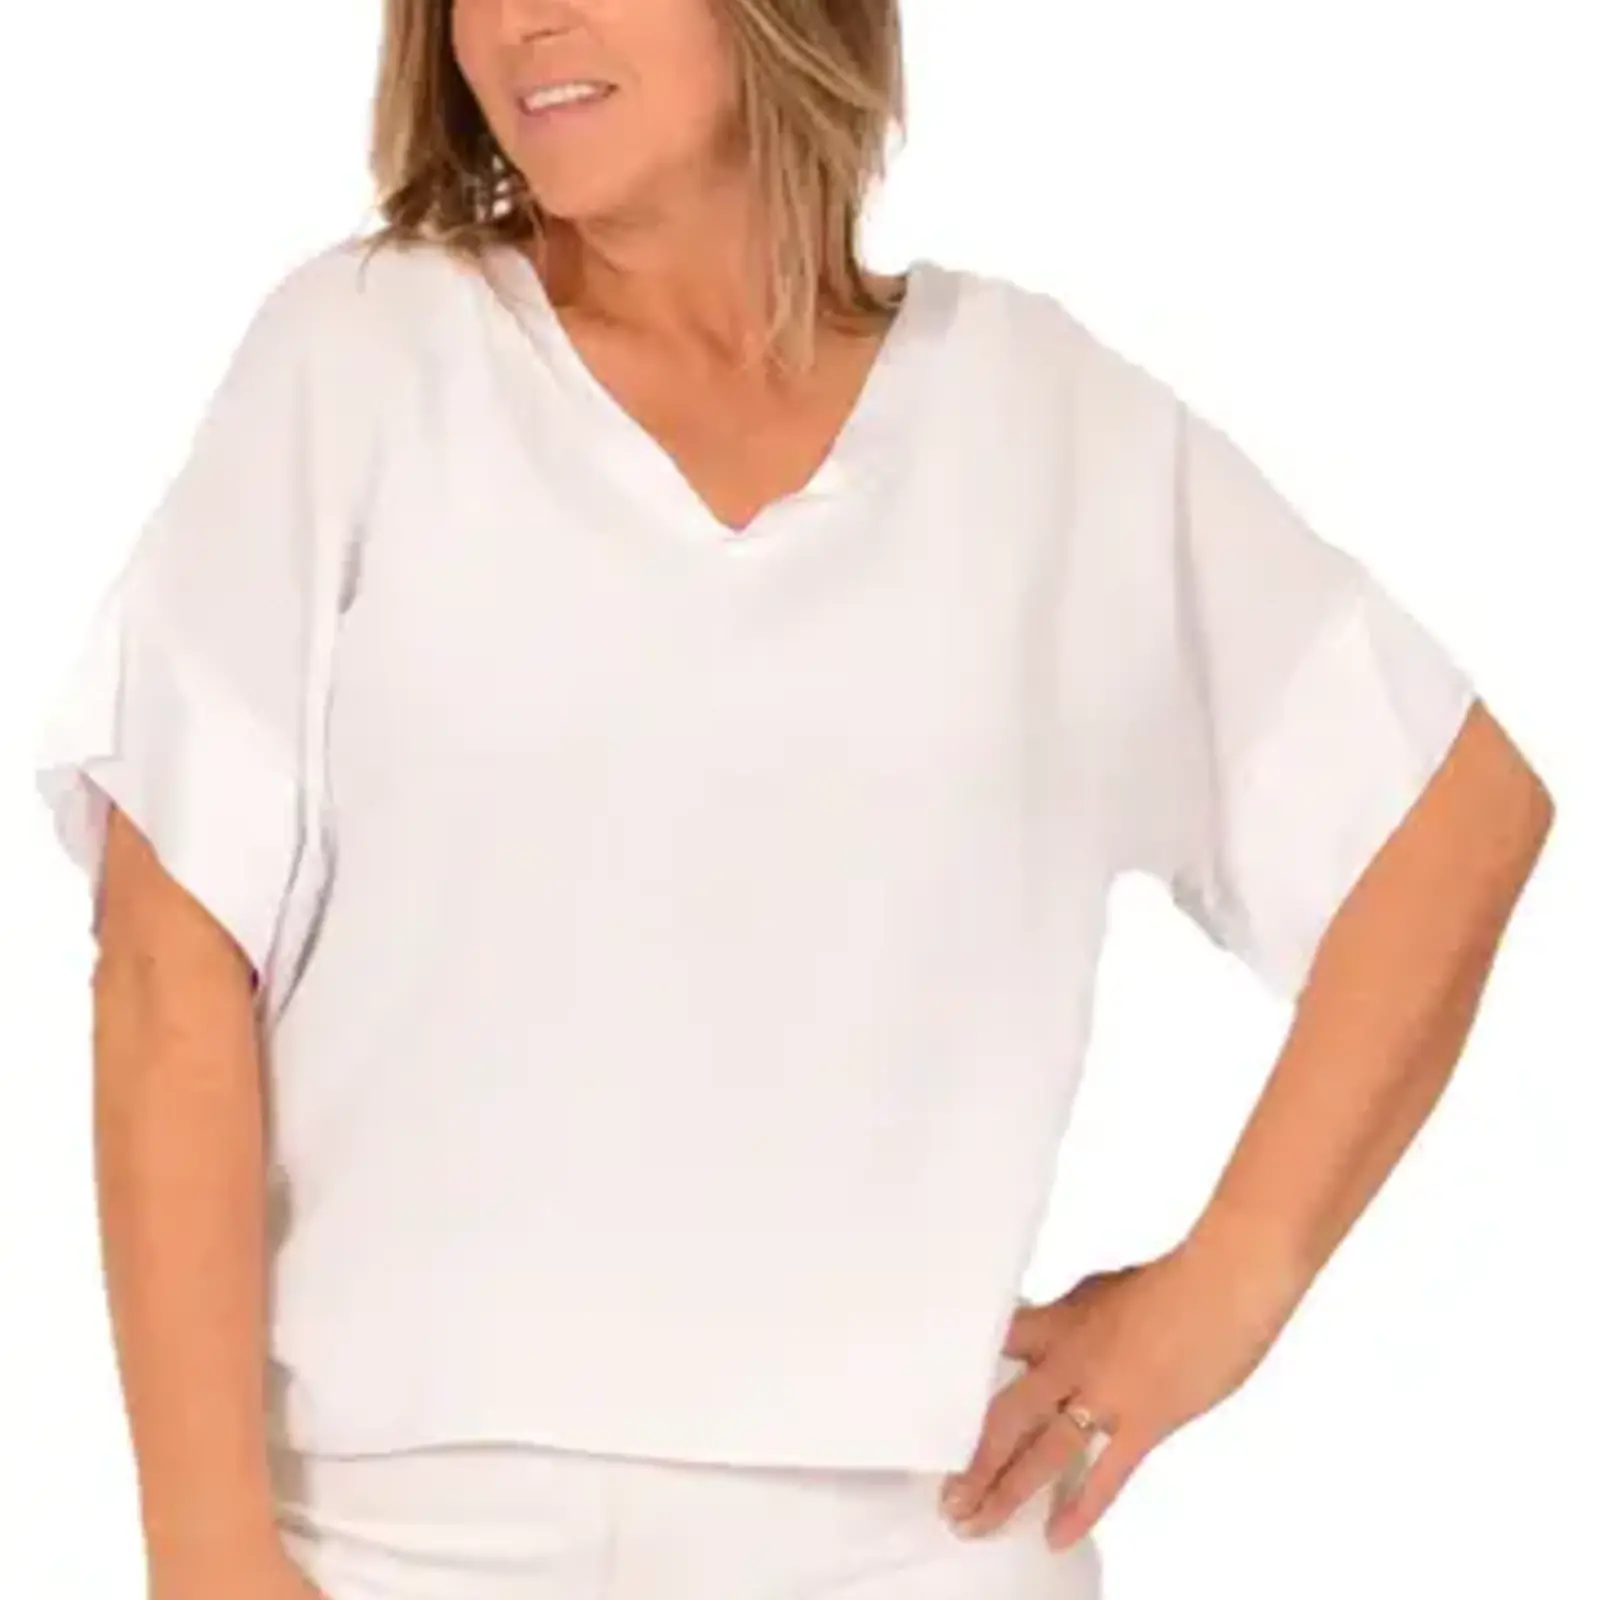 Catherine Lillywhite's White Satin Edge Tee  Made in Italy  ITEL809903WH loading=